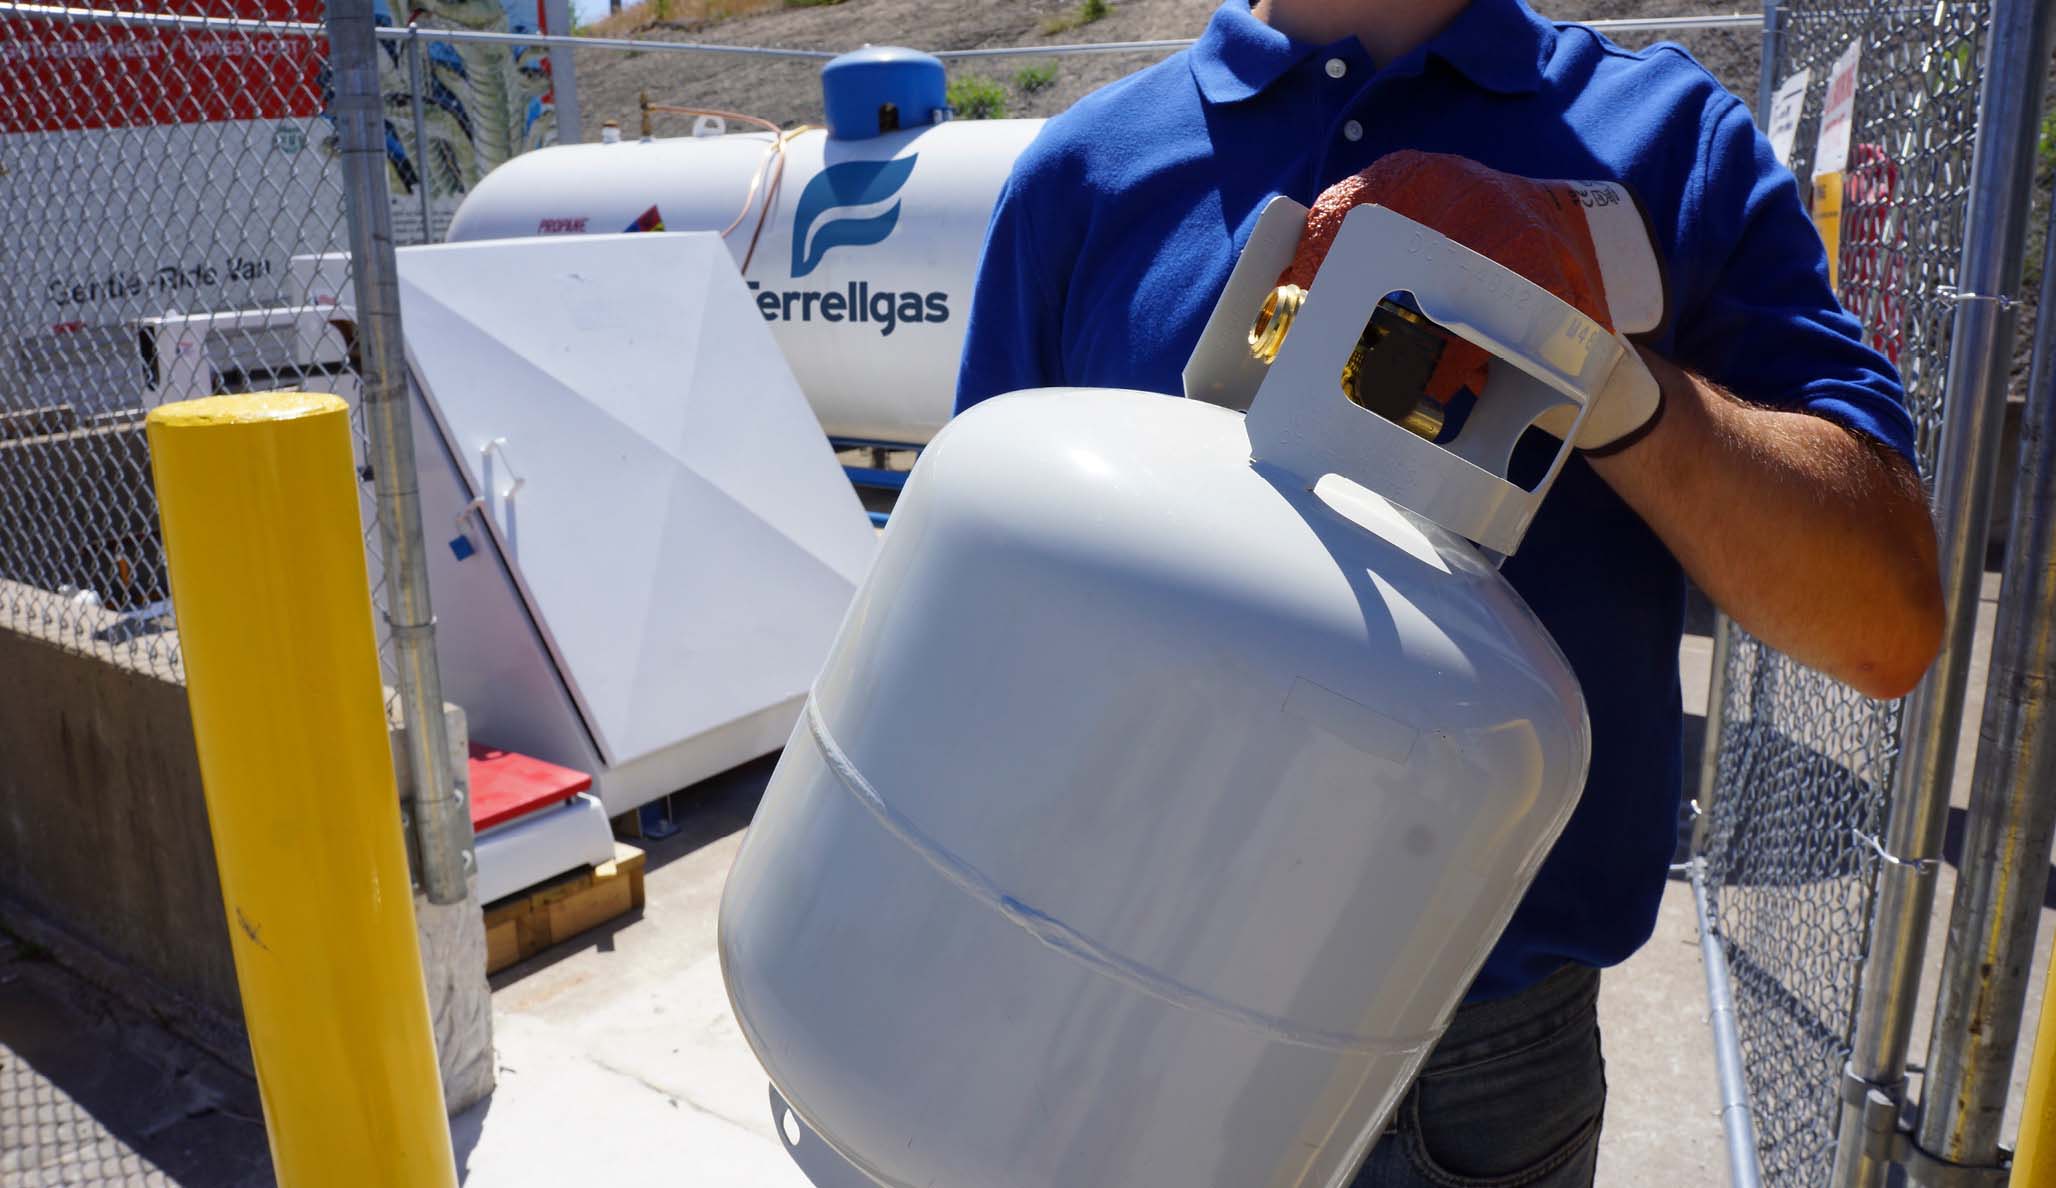 How to Handle and Work Near Propane Safely on the Job